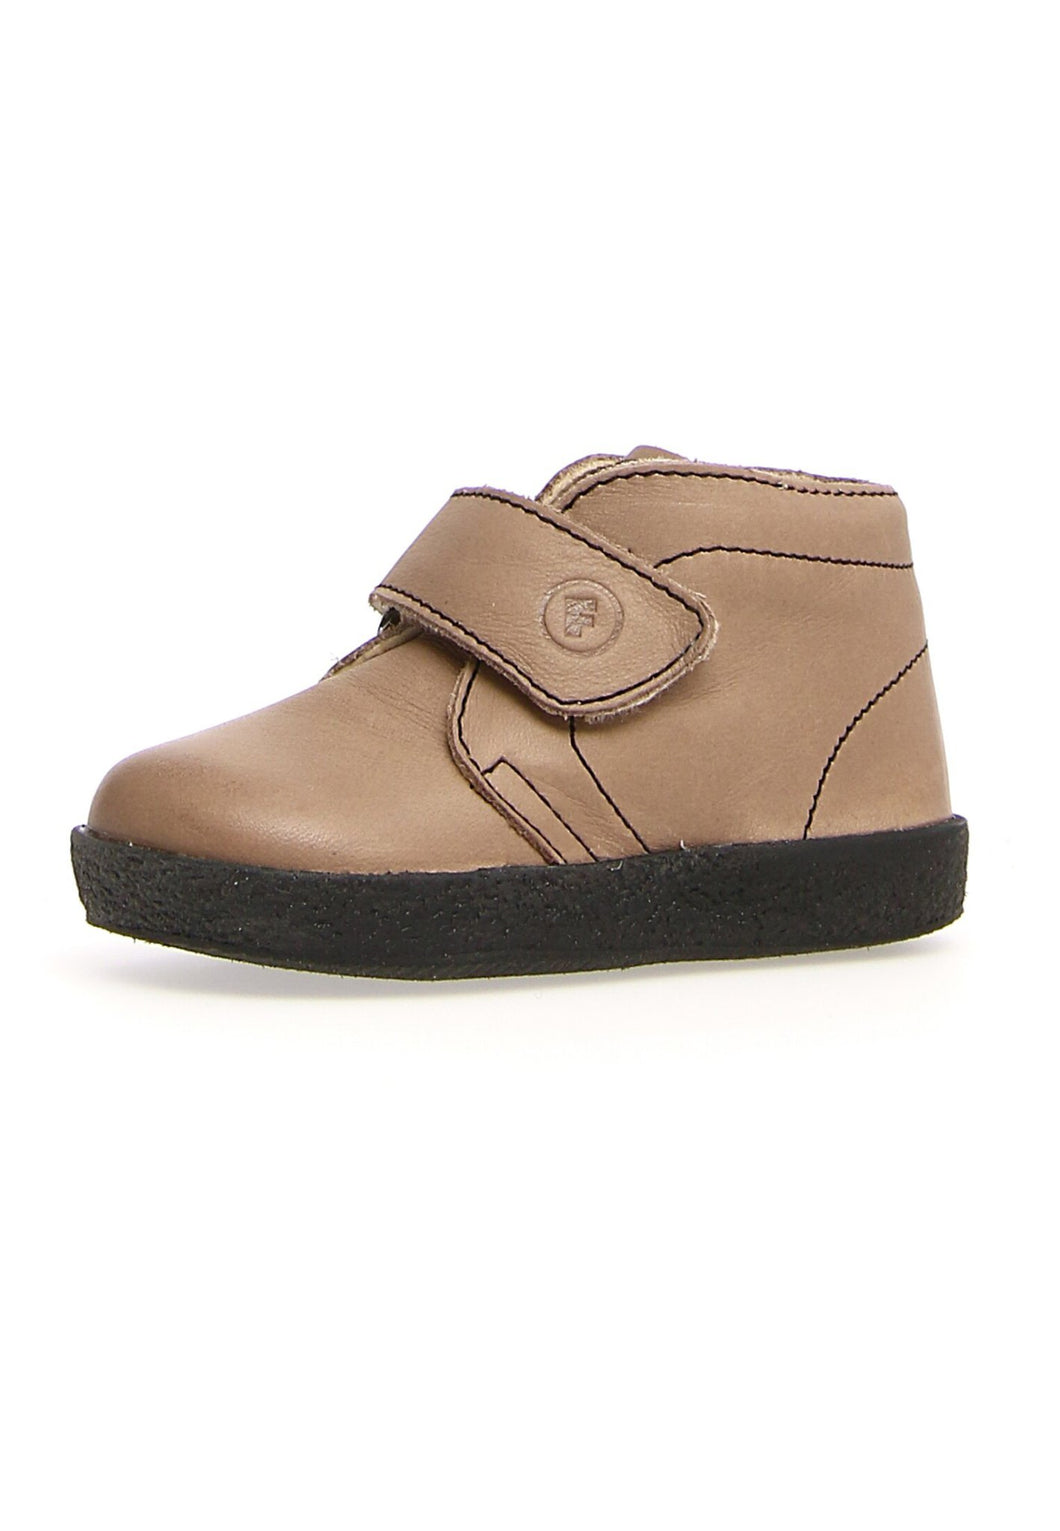 FW23 Baby Falcotto Conte VL Taupe Spazz